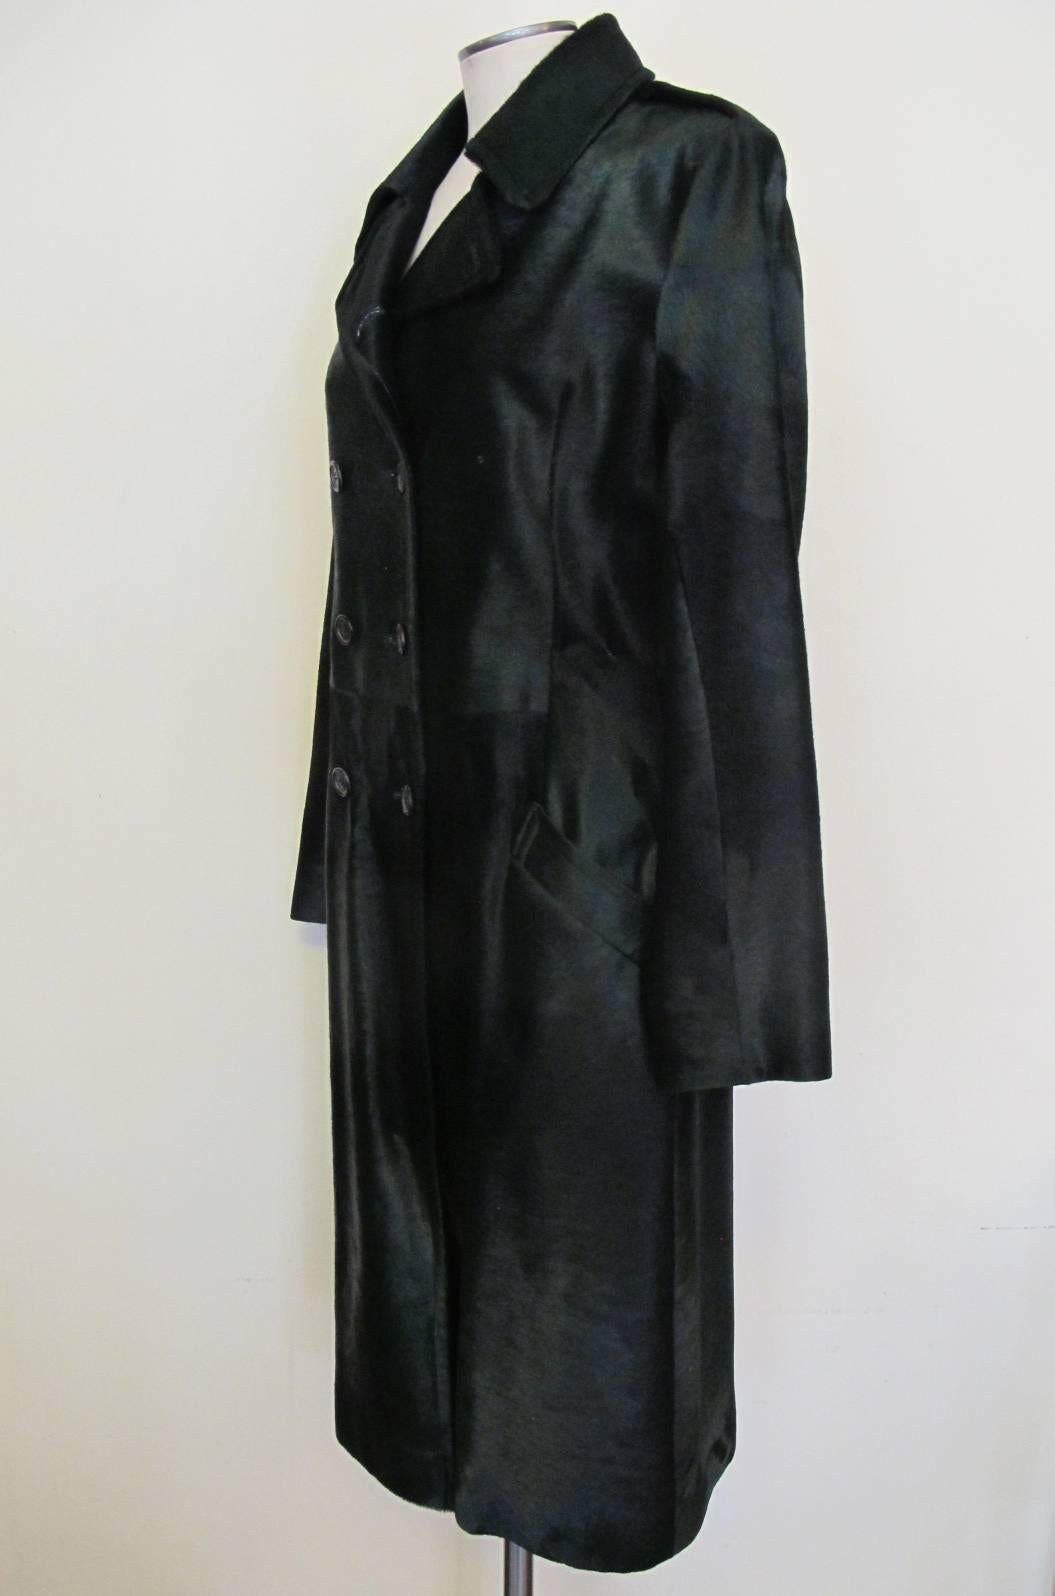 Over the top elegant Prada double breasted forest green calf fur coat with two pockets. Six buttons serve as the panel for the coat. The coat is absolutely stunning! Sleeve length measures 24 inches. Shoulder to shoulder measures 16.5 inches.